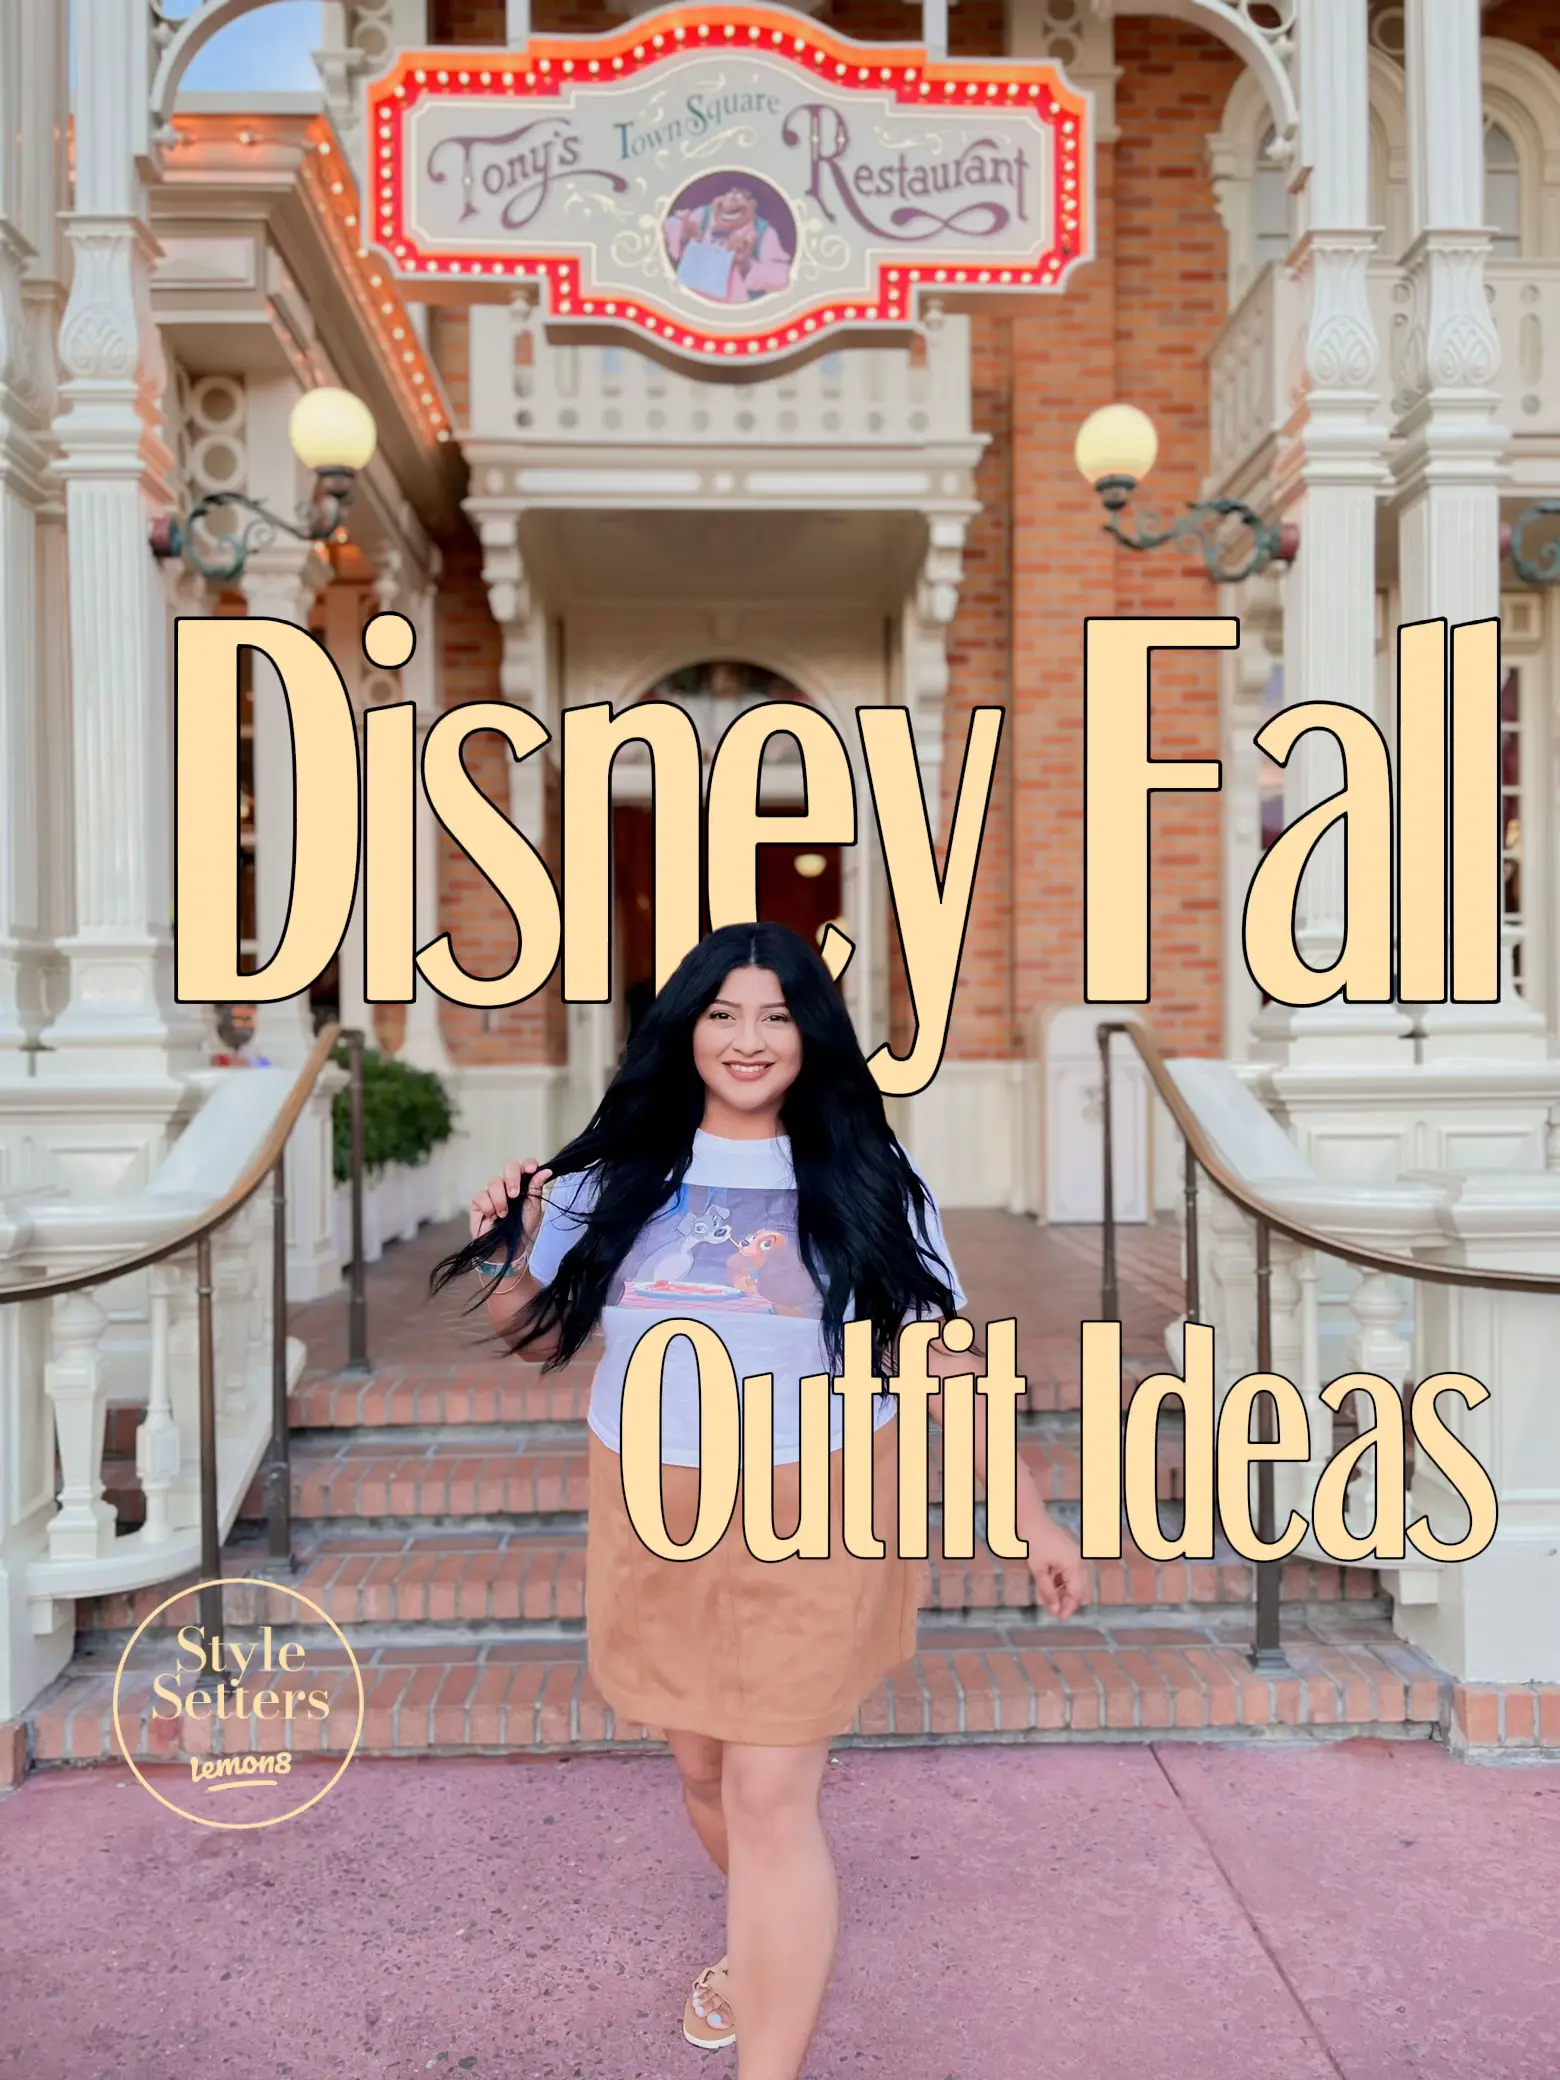 What I Wore: Disneyland Edition 🏰✨🎠💓, Gallery posted by Hannah Crews